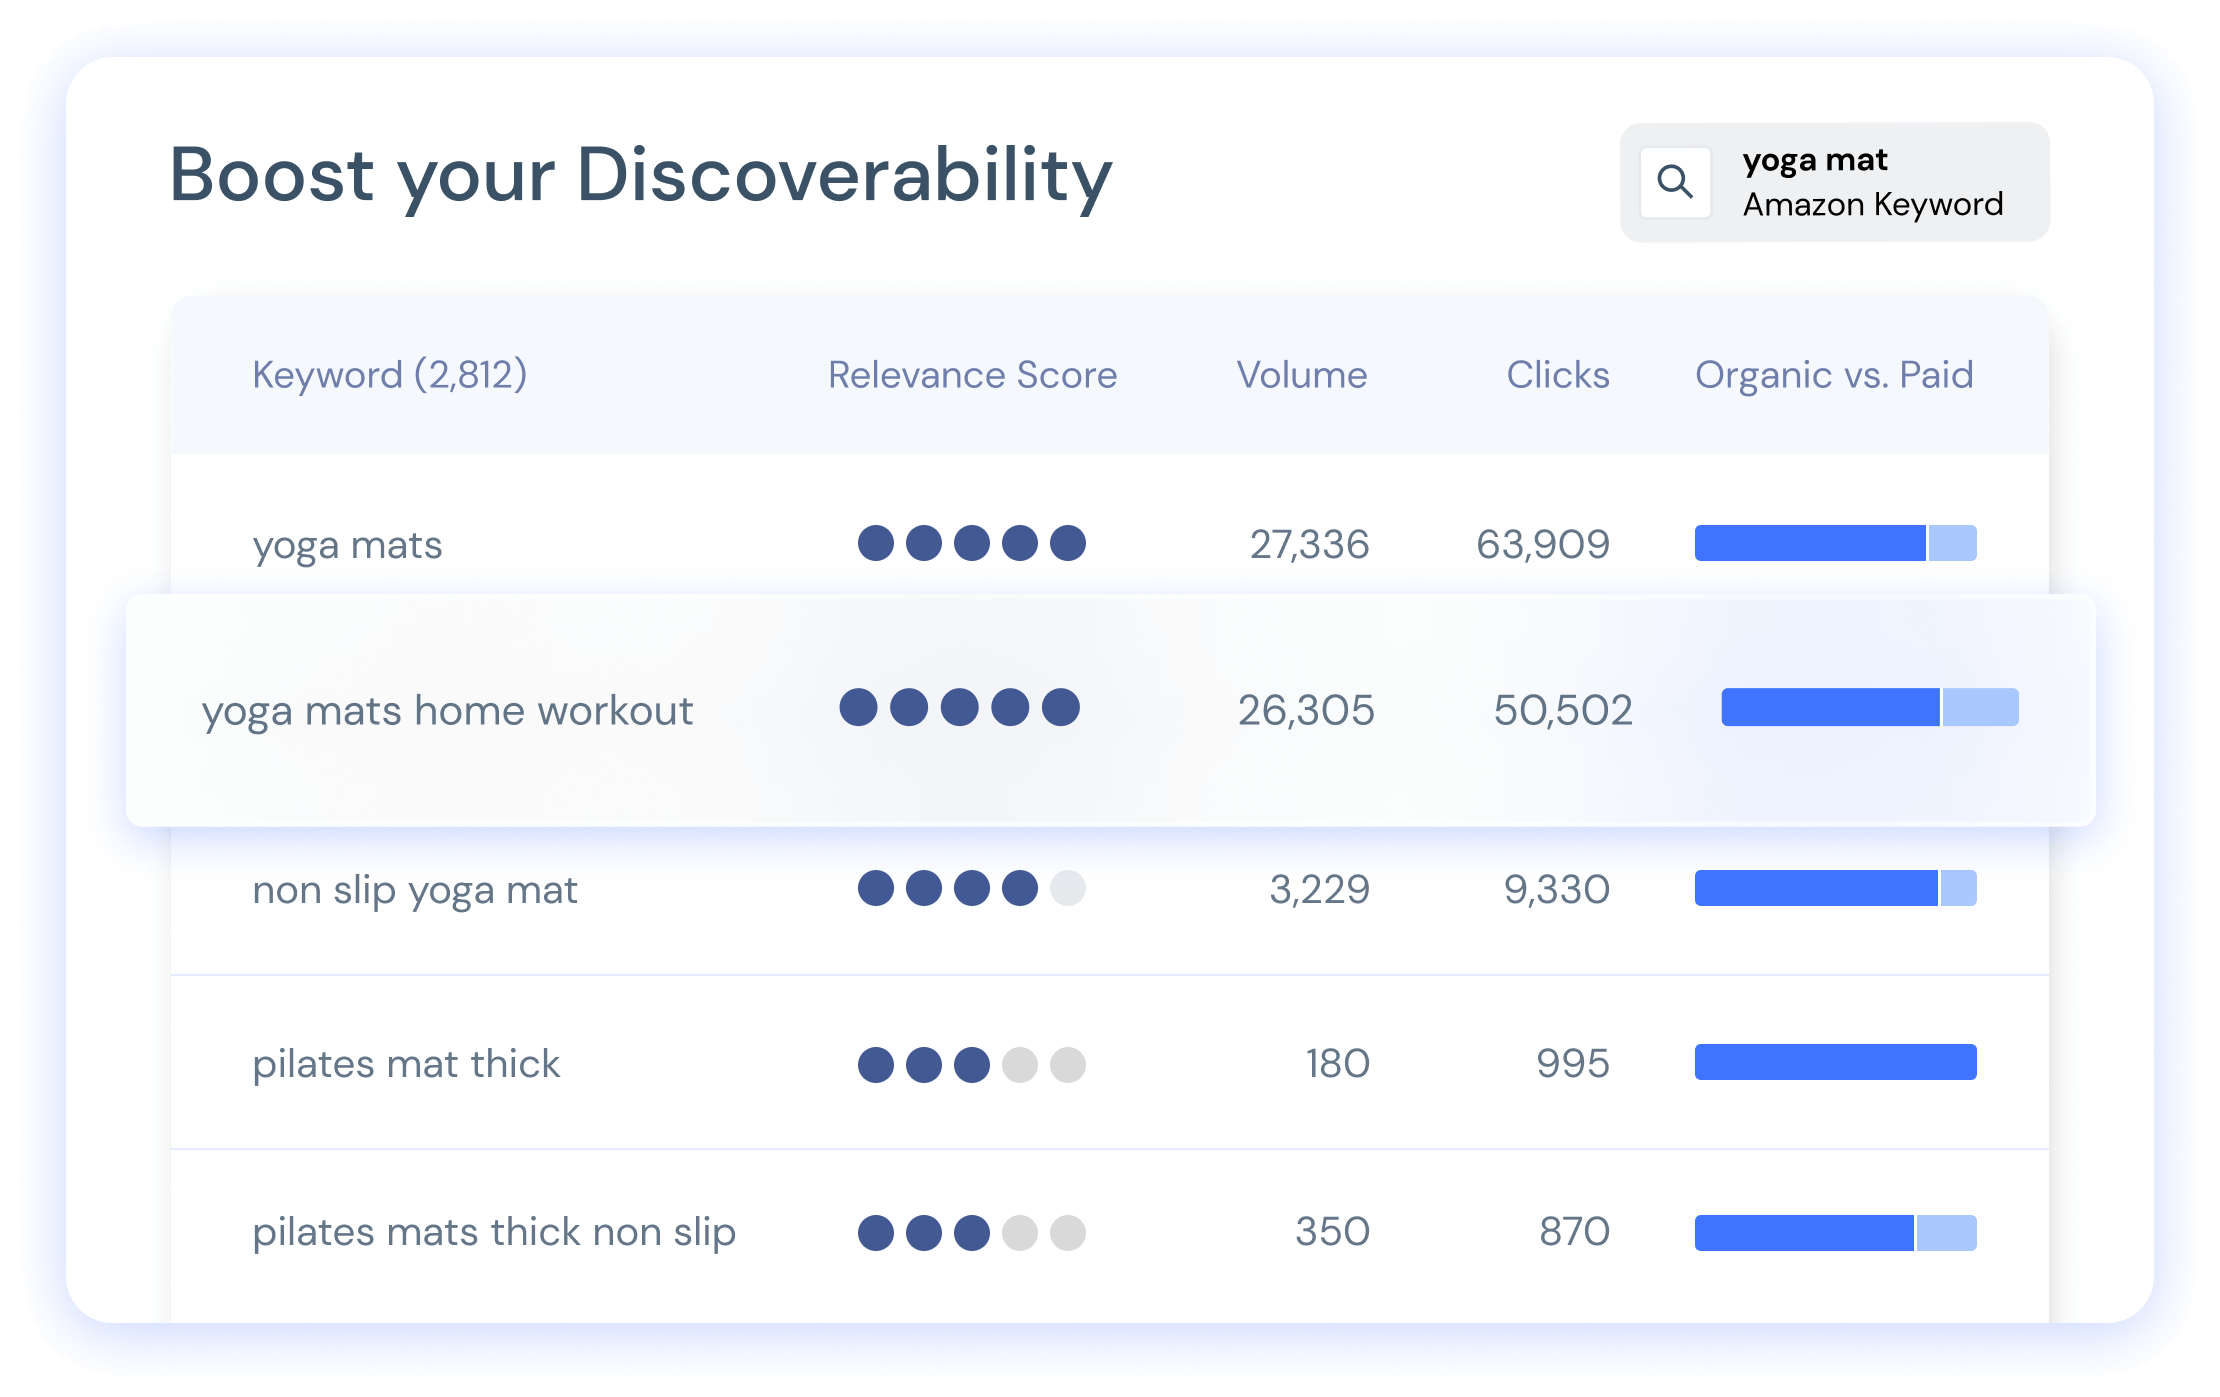 Boost your Discoverability